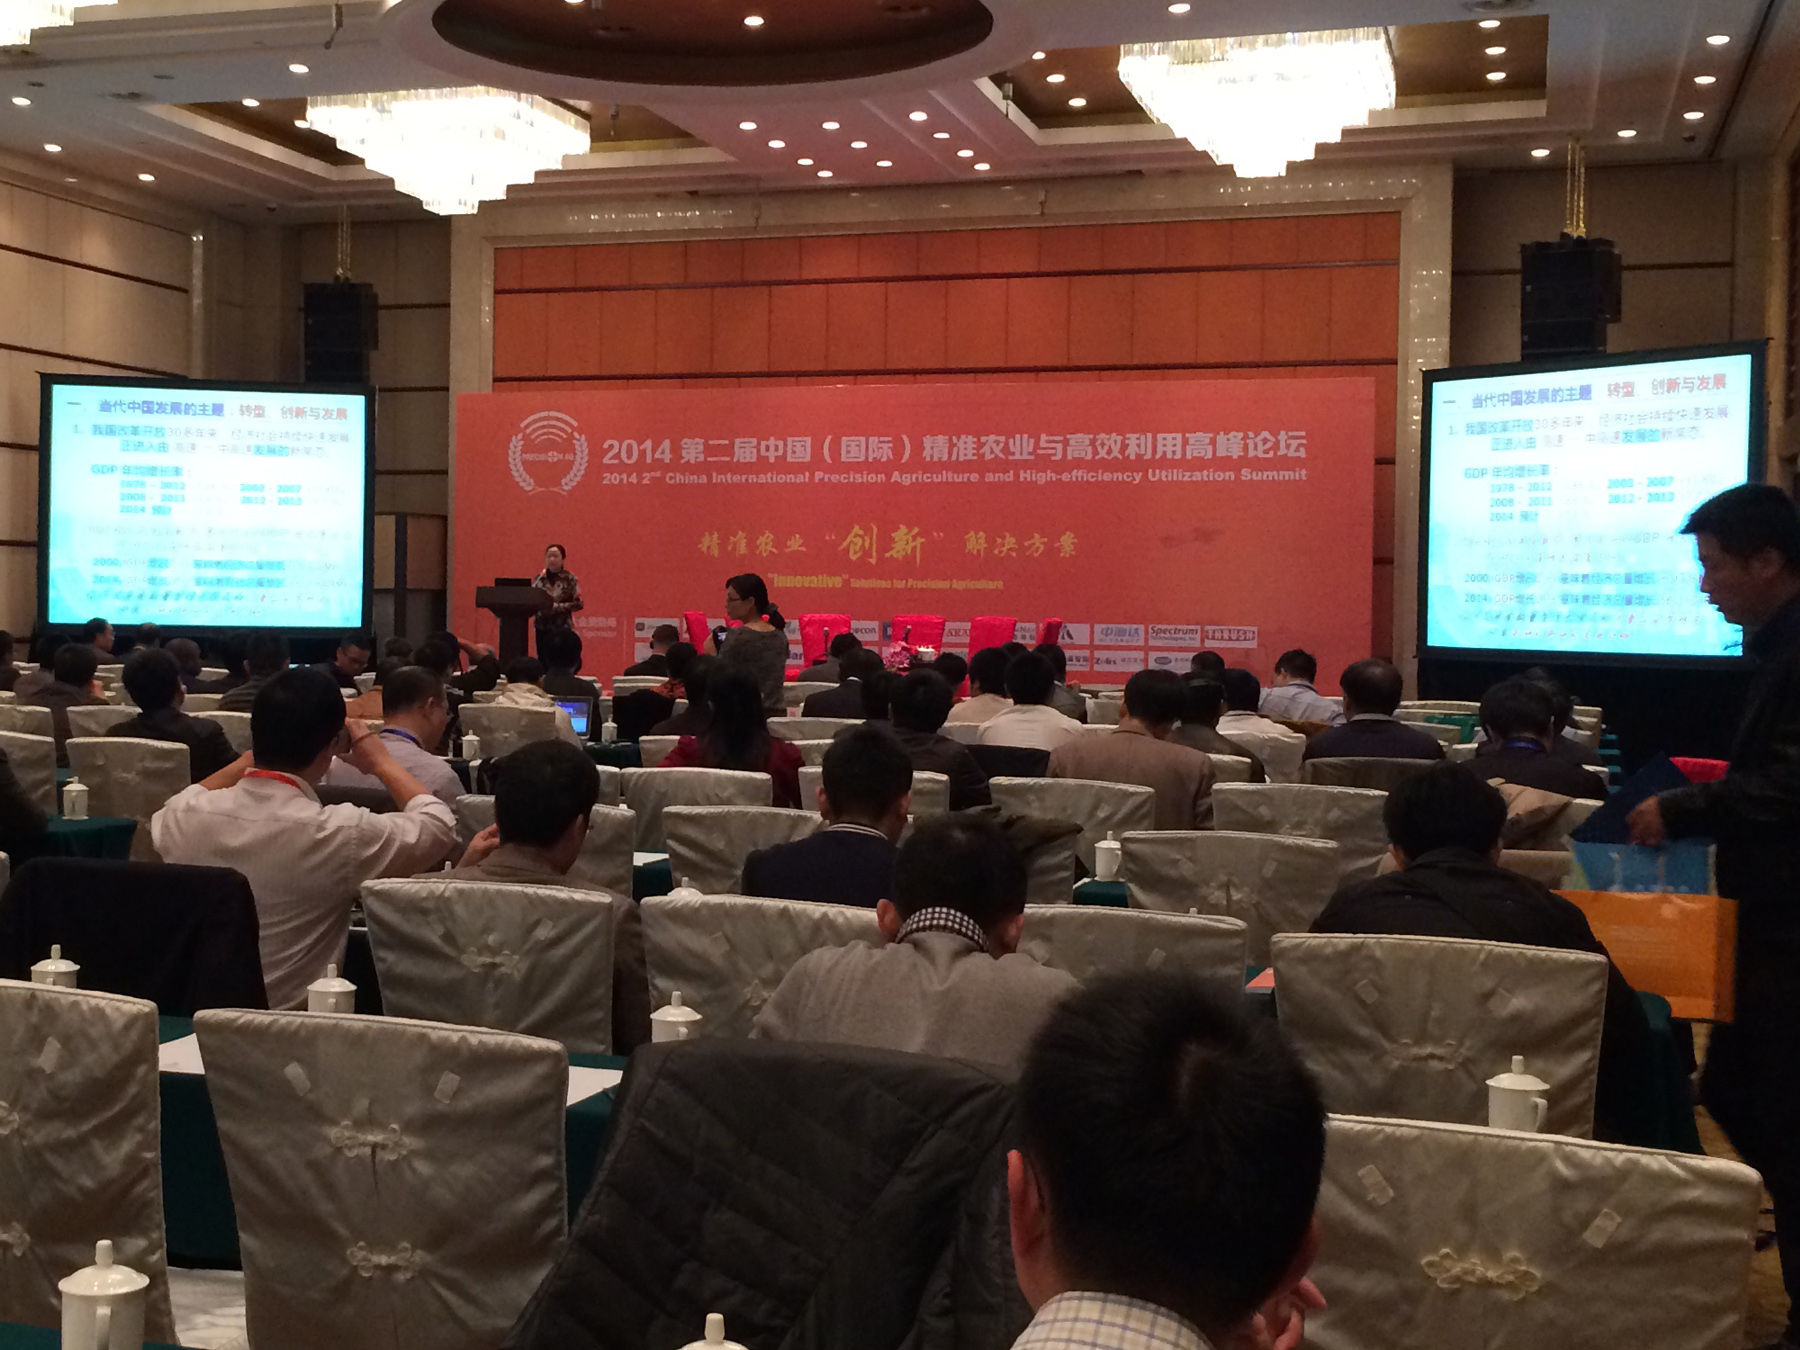 China International Precision Agriculture and High-efficiency Utilization Summit